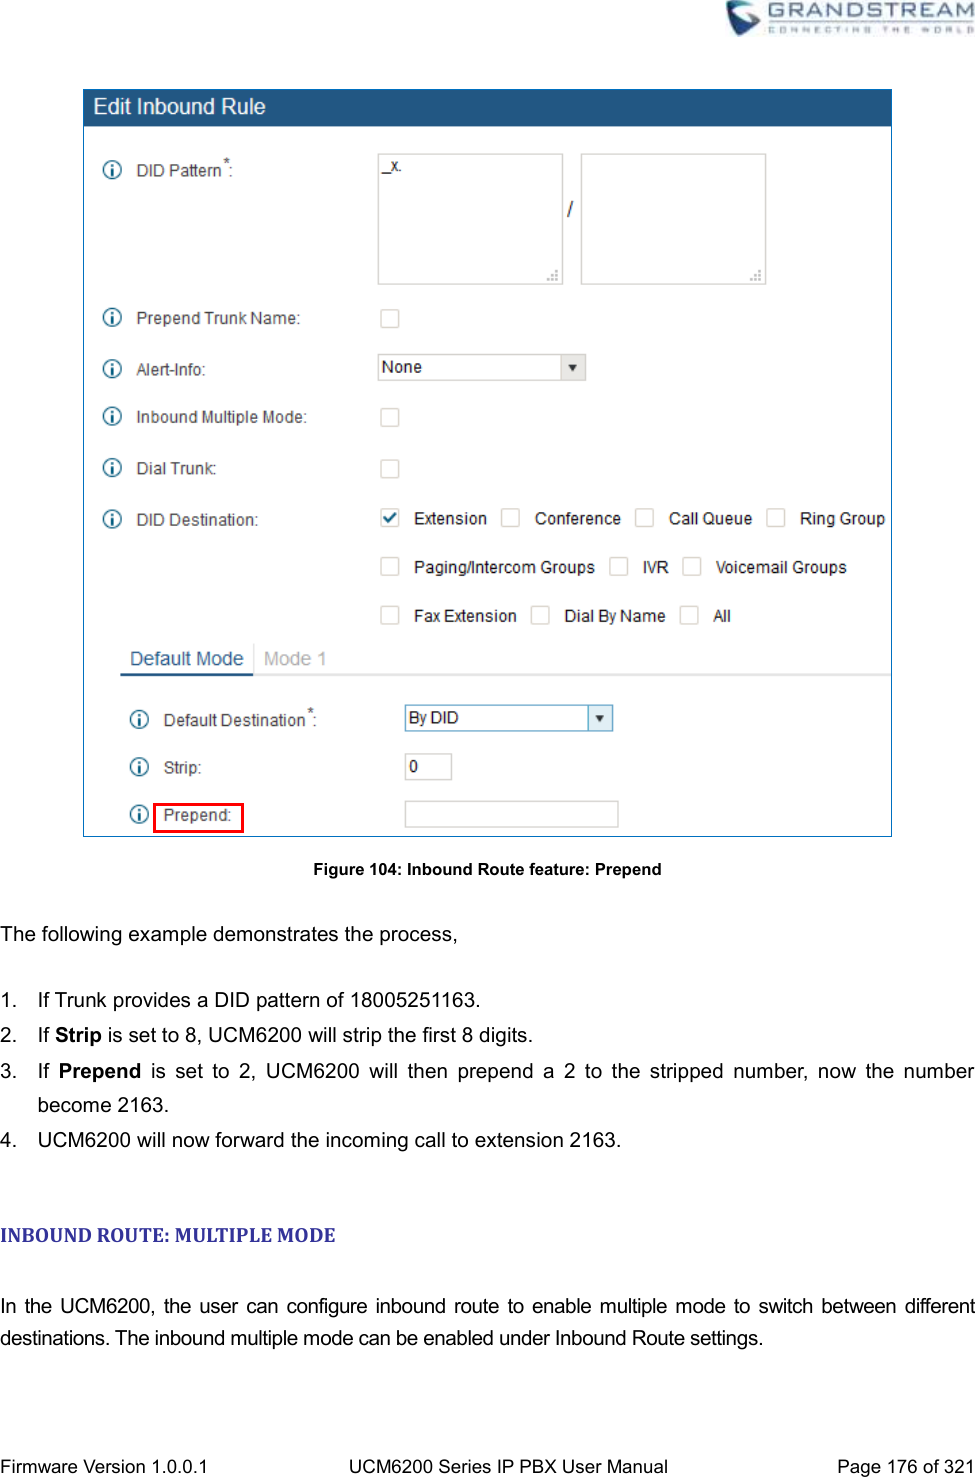  Firmware Version 1.0.0.1 UCM6200 Series IP PBX User Manual Page 176 of 321     Figure 104: Inbound Route feature: Prepend  The following example demonstrates the process,  1.  If Trunk provides a DID pattern of 18005251163. 2.  If Strip is set to 8, UCM6200 will strip the first 8 digits.   3.  If  Prepend  is  set  to  2,  UCM6200  will  then  prepend  a  2  to  the  stripped  number,  now  the  number become 2163. 4. UCM6200 will now forward the incoming call to extension 2163.    INBOUND ROUTE: MULTIPLE MODE  In  the  UCM6200,  the  user can configure inbound route to enable multiple mode to switch between different destinations. The inbound multiple mode can be enabled under Inbound Route settings.   